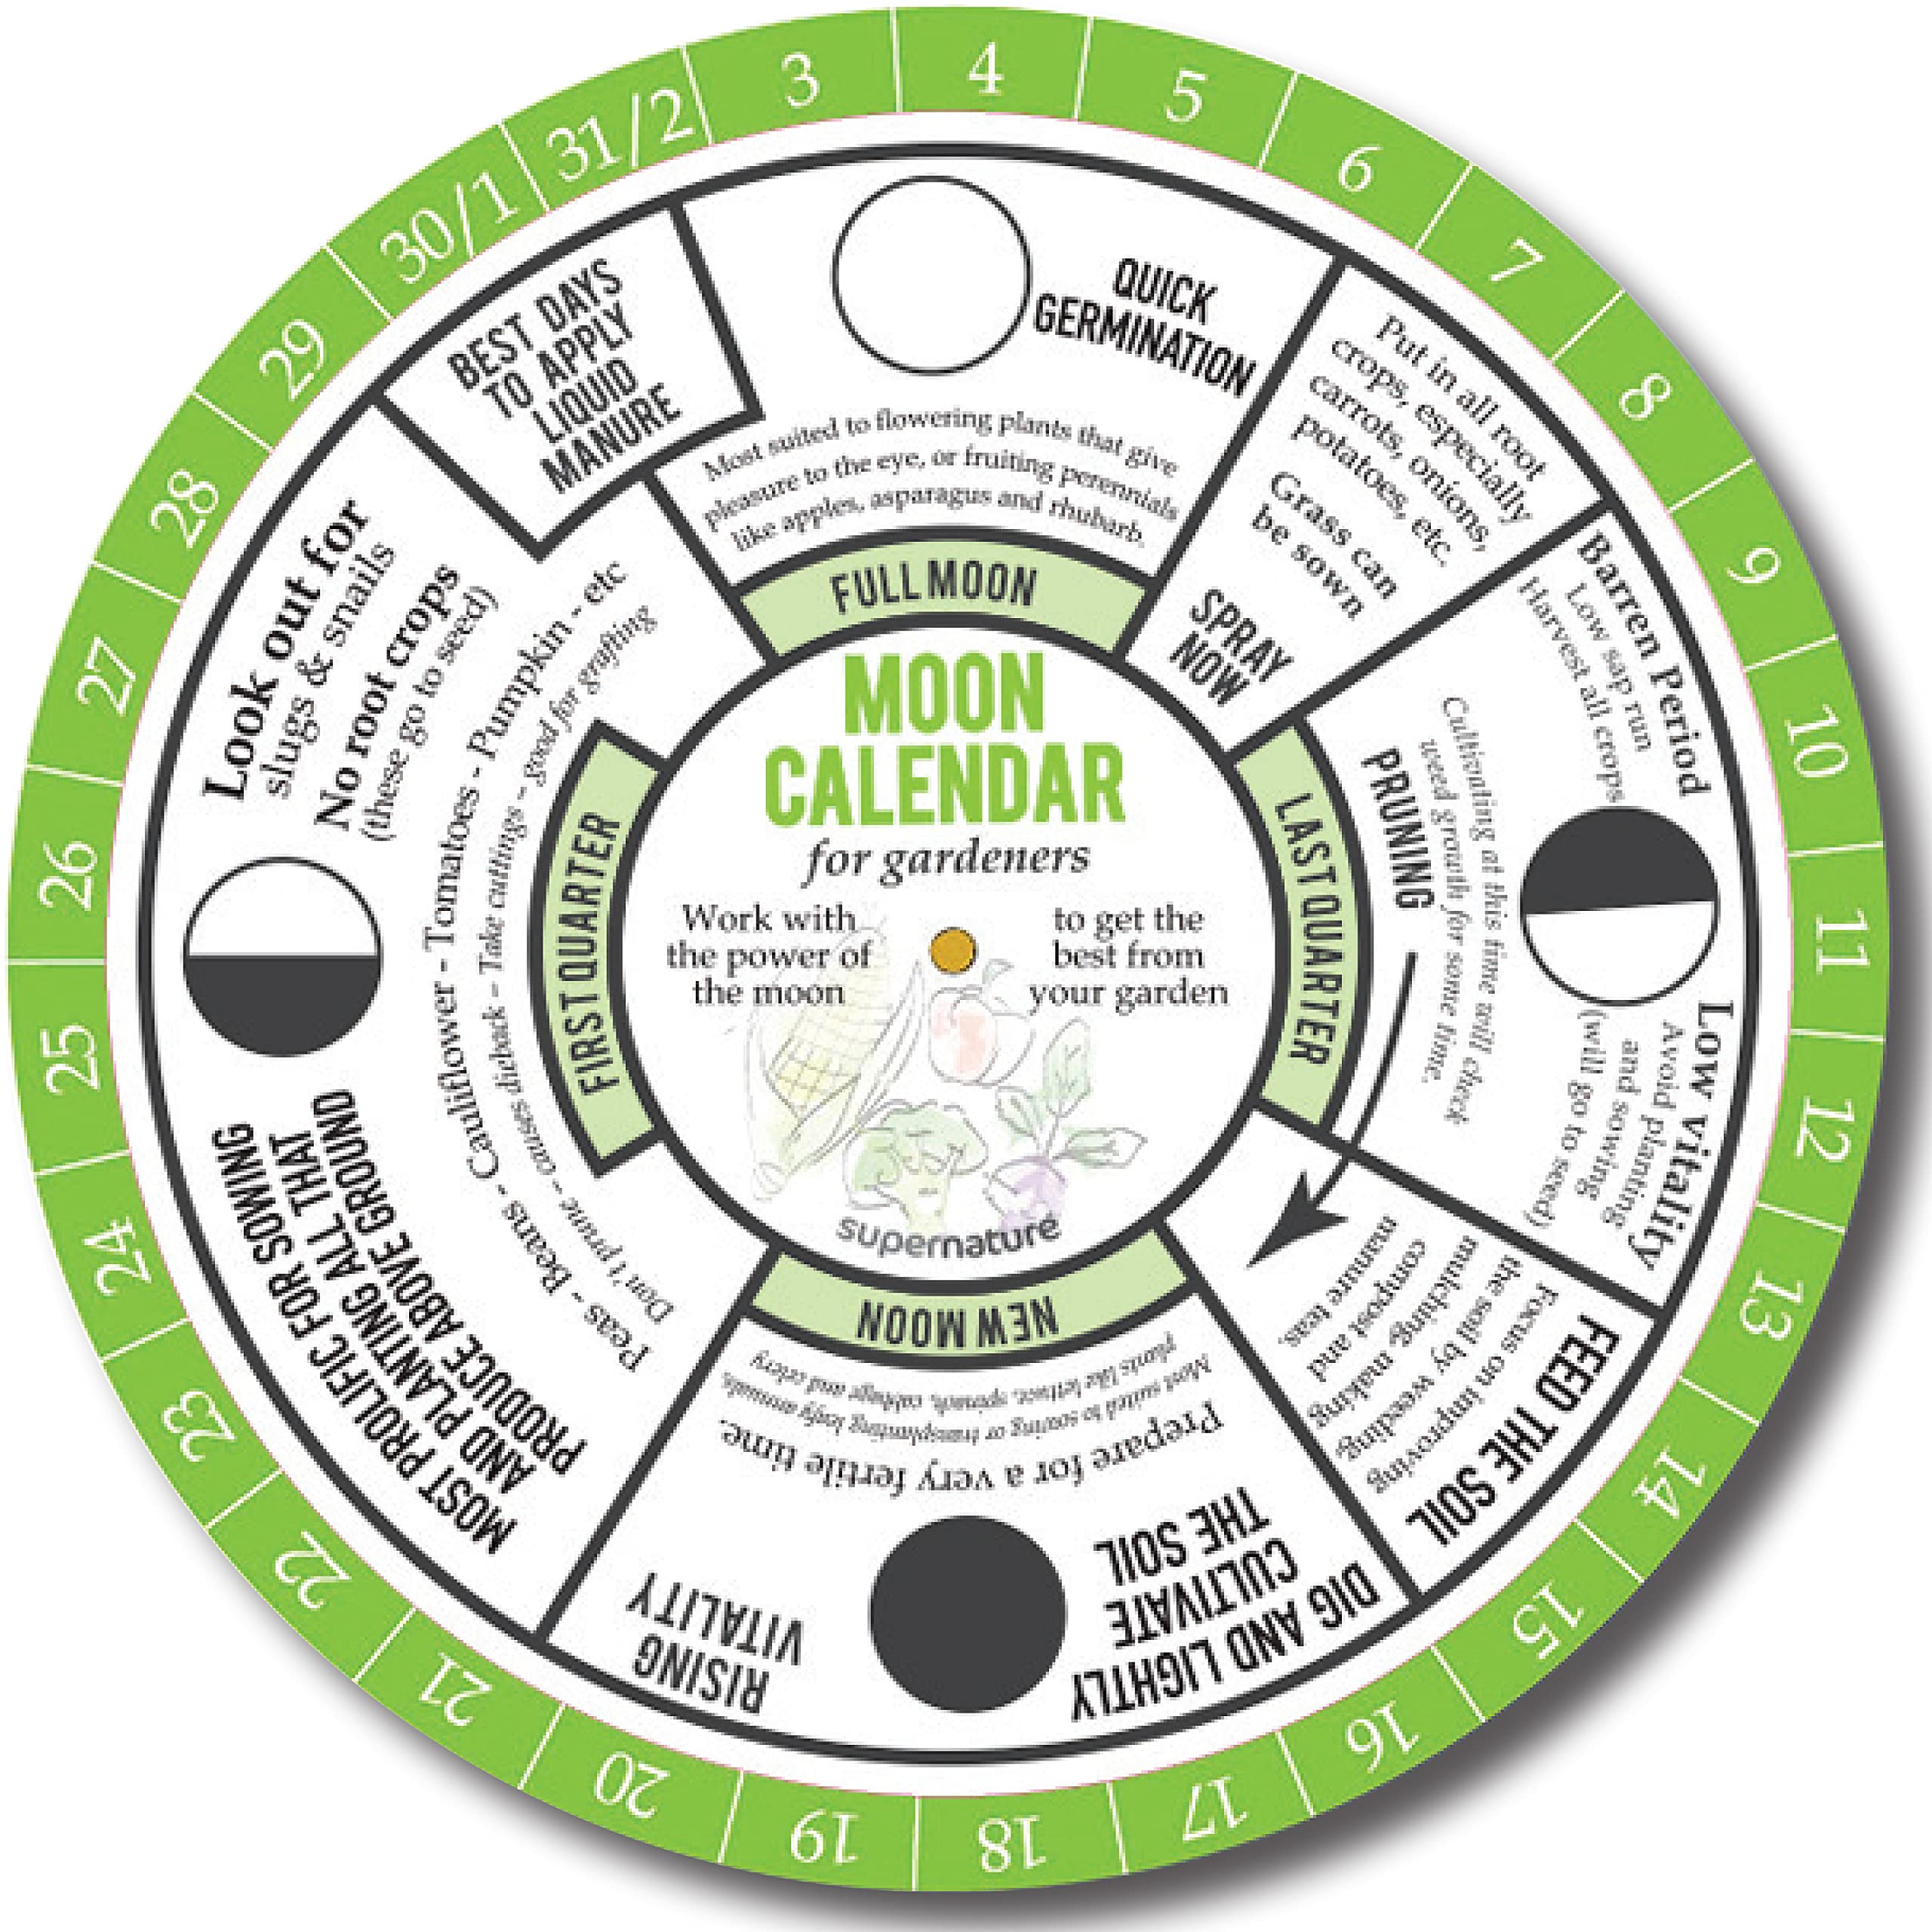 Supernature Moon Calendar for Gardeners: Learn to Garden in Tune with the Phases of the Moon. Find the Best Times to Sow, Plant, Prune & Har